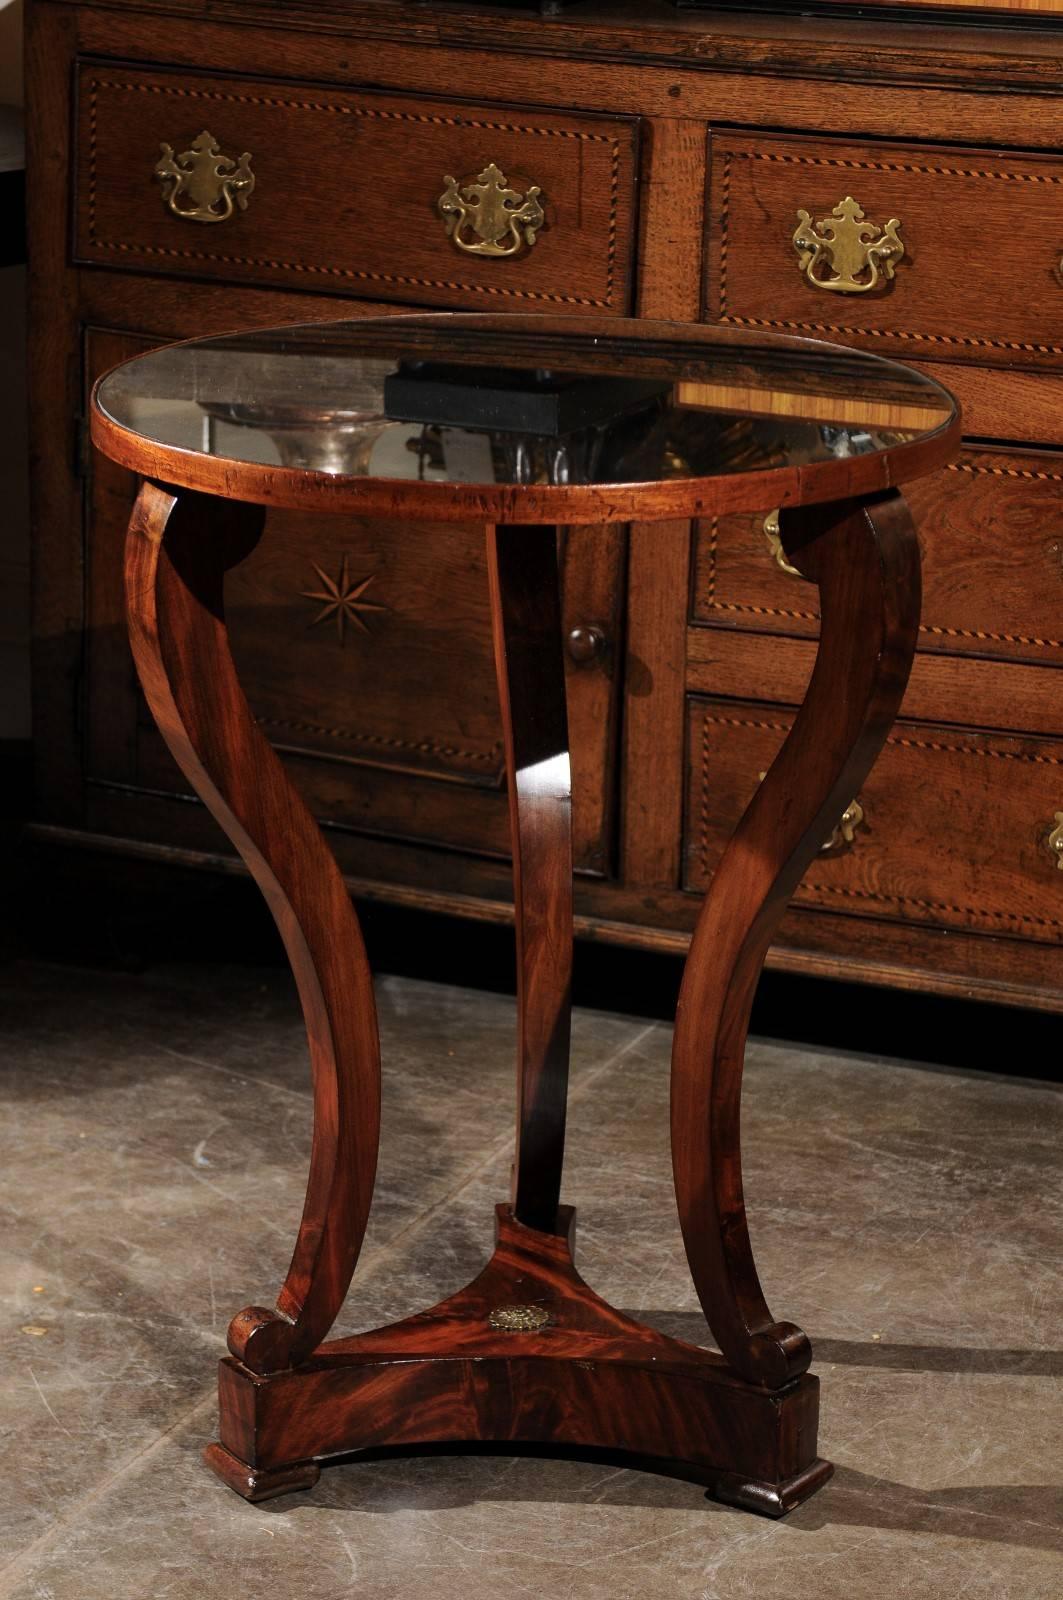 This French 19th century Restauration style guéridon side table features a circular distressed mirrored top supported by three s-scroll shaped legs. These elegant legs are raised on a triangular base, showing a concave profile on all sides. The